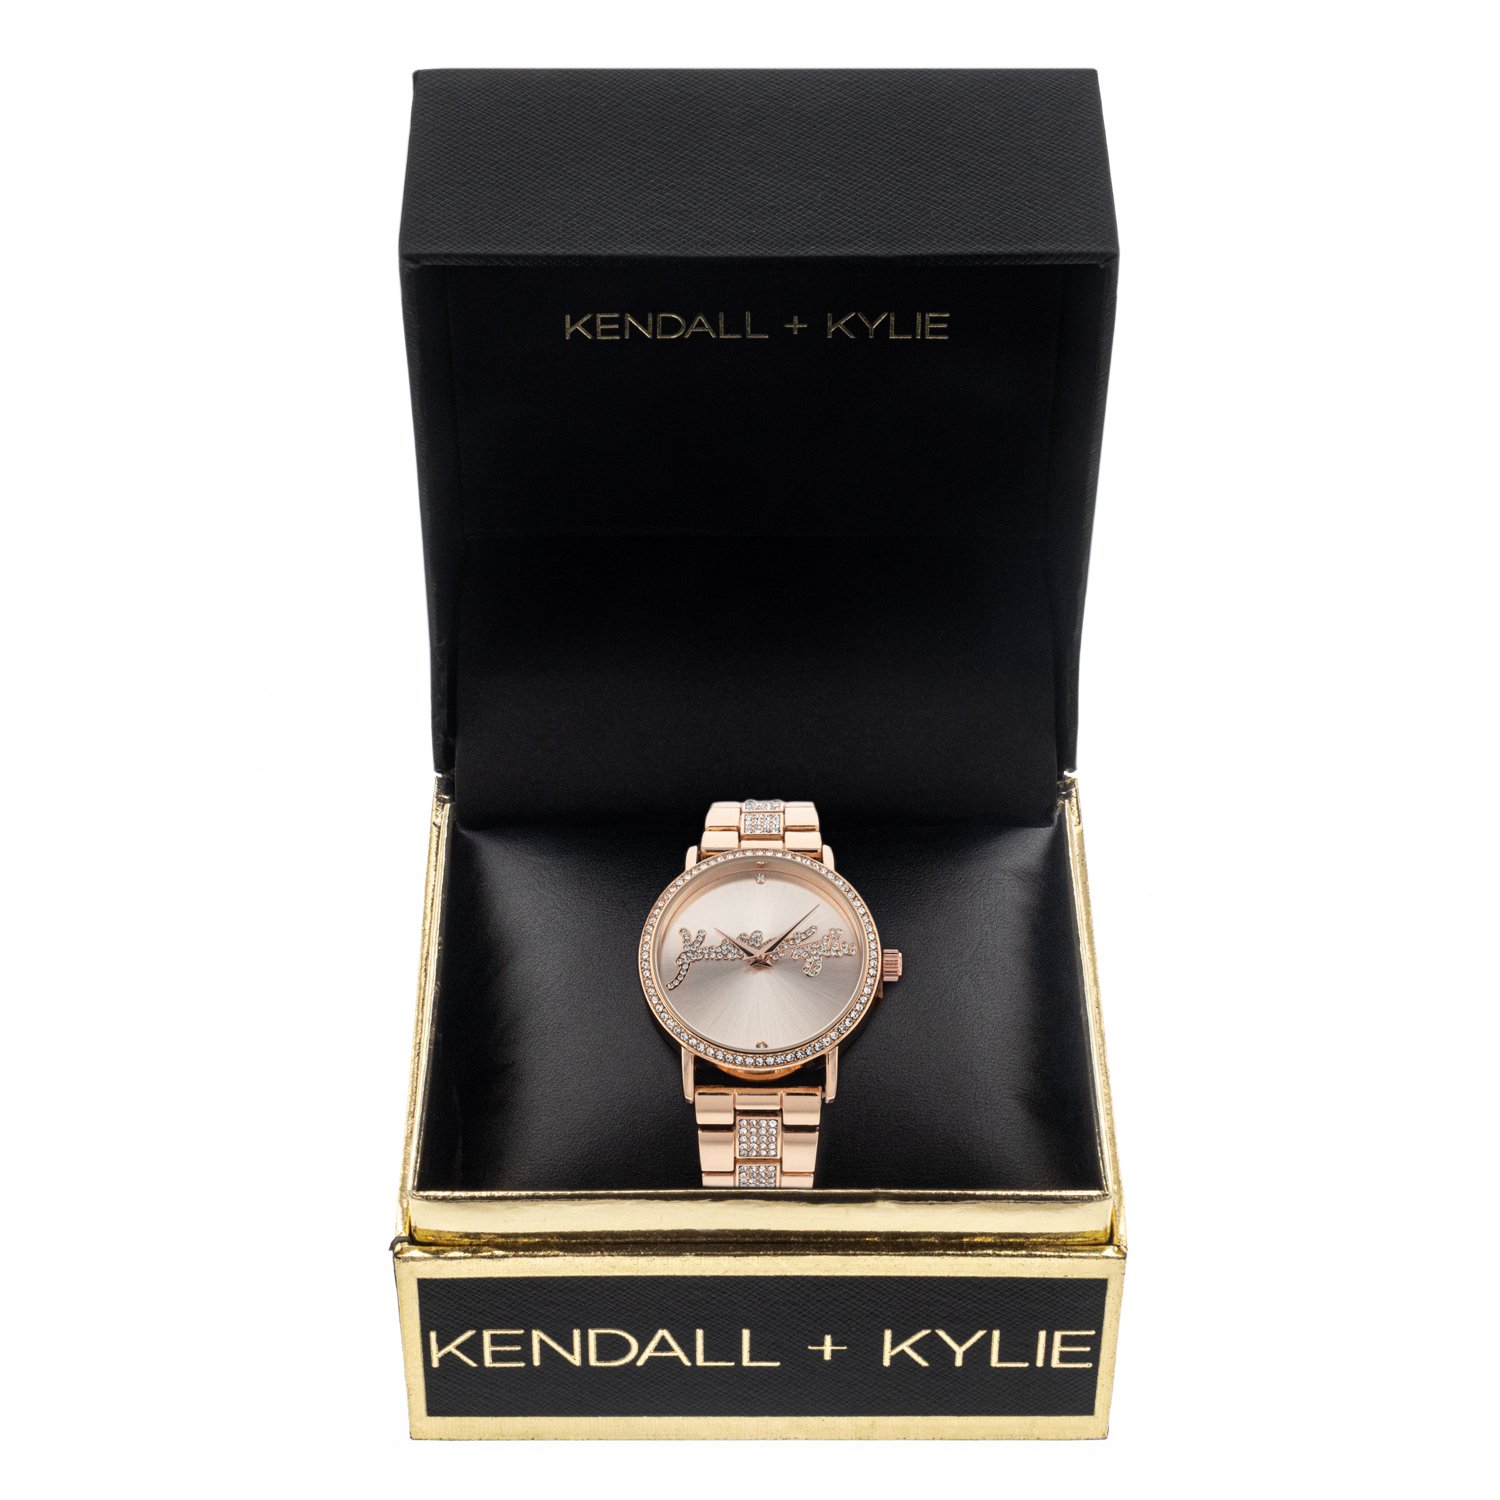 Kendall + Kylie Rose Gold Toned Metal Analog Watch with Bedazzled Logo - image 3 of 4